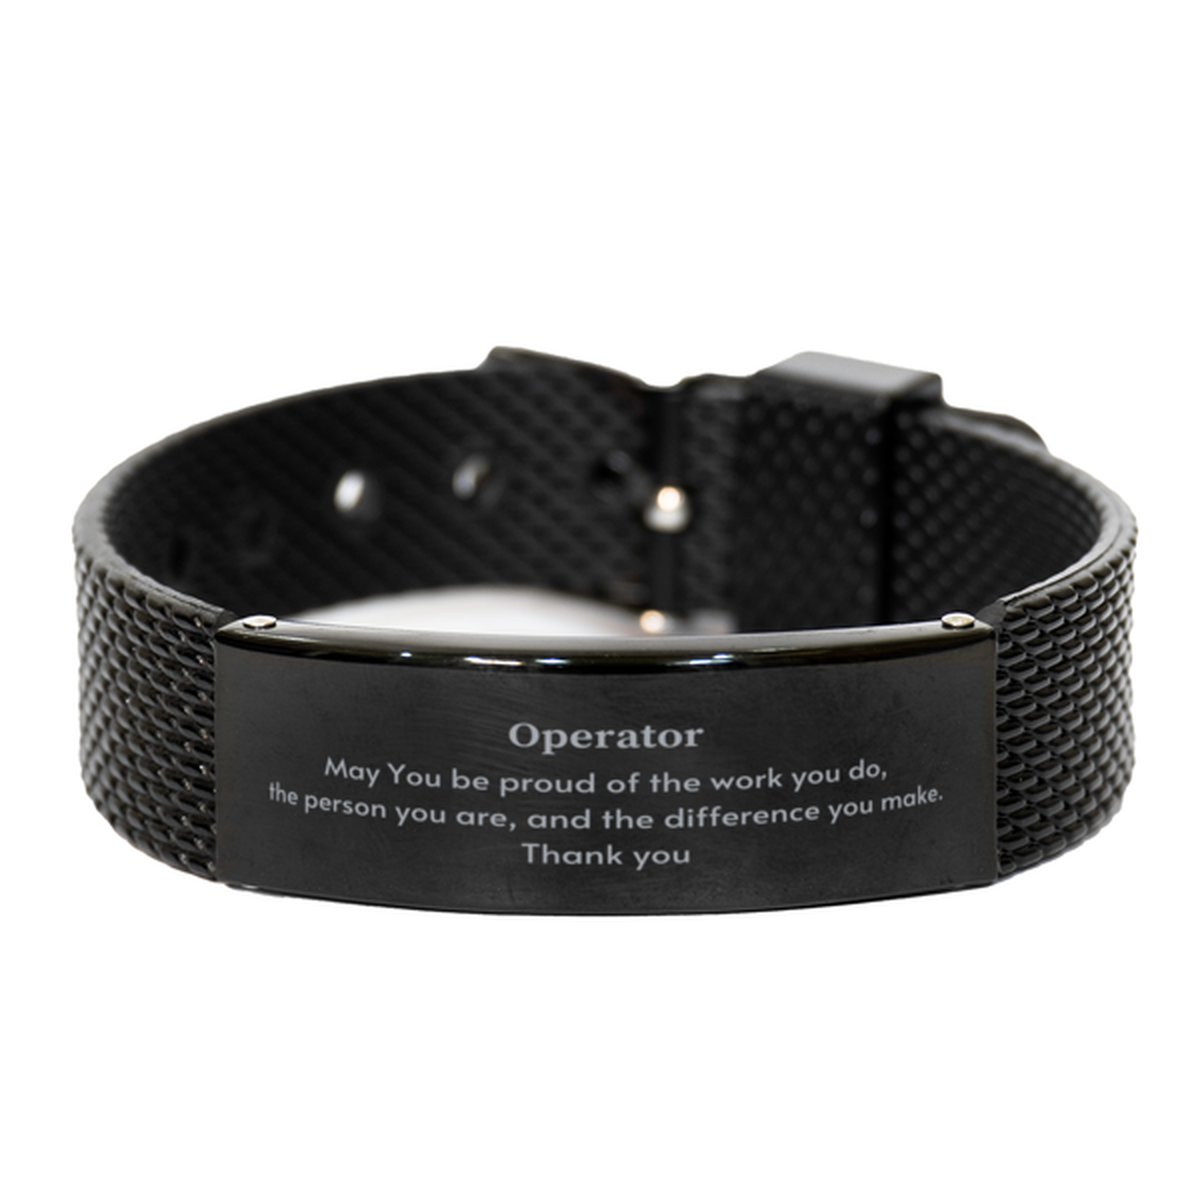 Heartwarming Black Shark Mesh Bracelet Retirement Coworkers Gifts for Operator, Operator May You be proud of the work you do, the person you are Gifts for Boss Men Women Friends